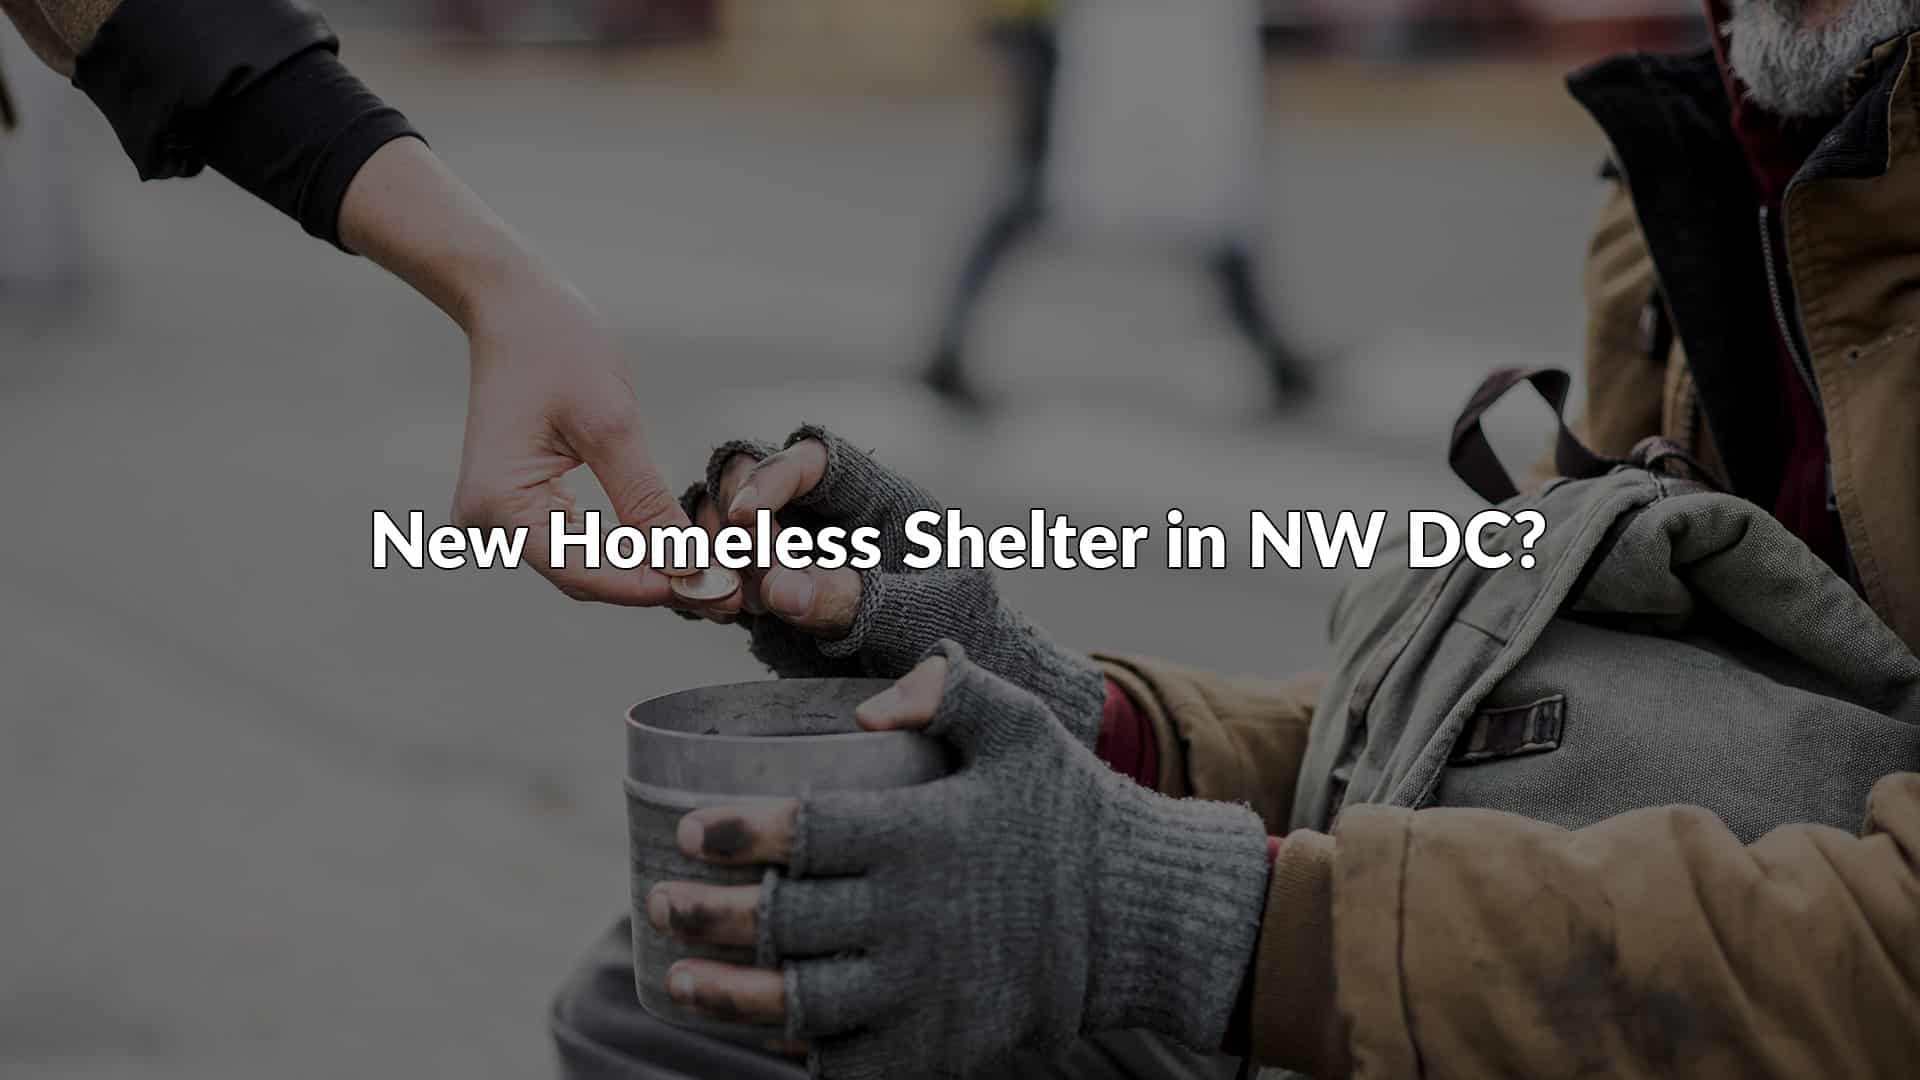 New Homeless Shelter in NW DC?